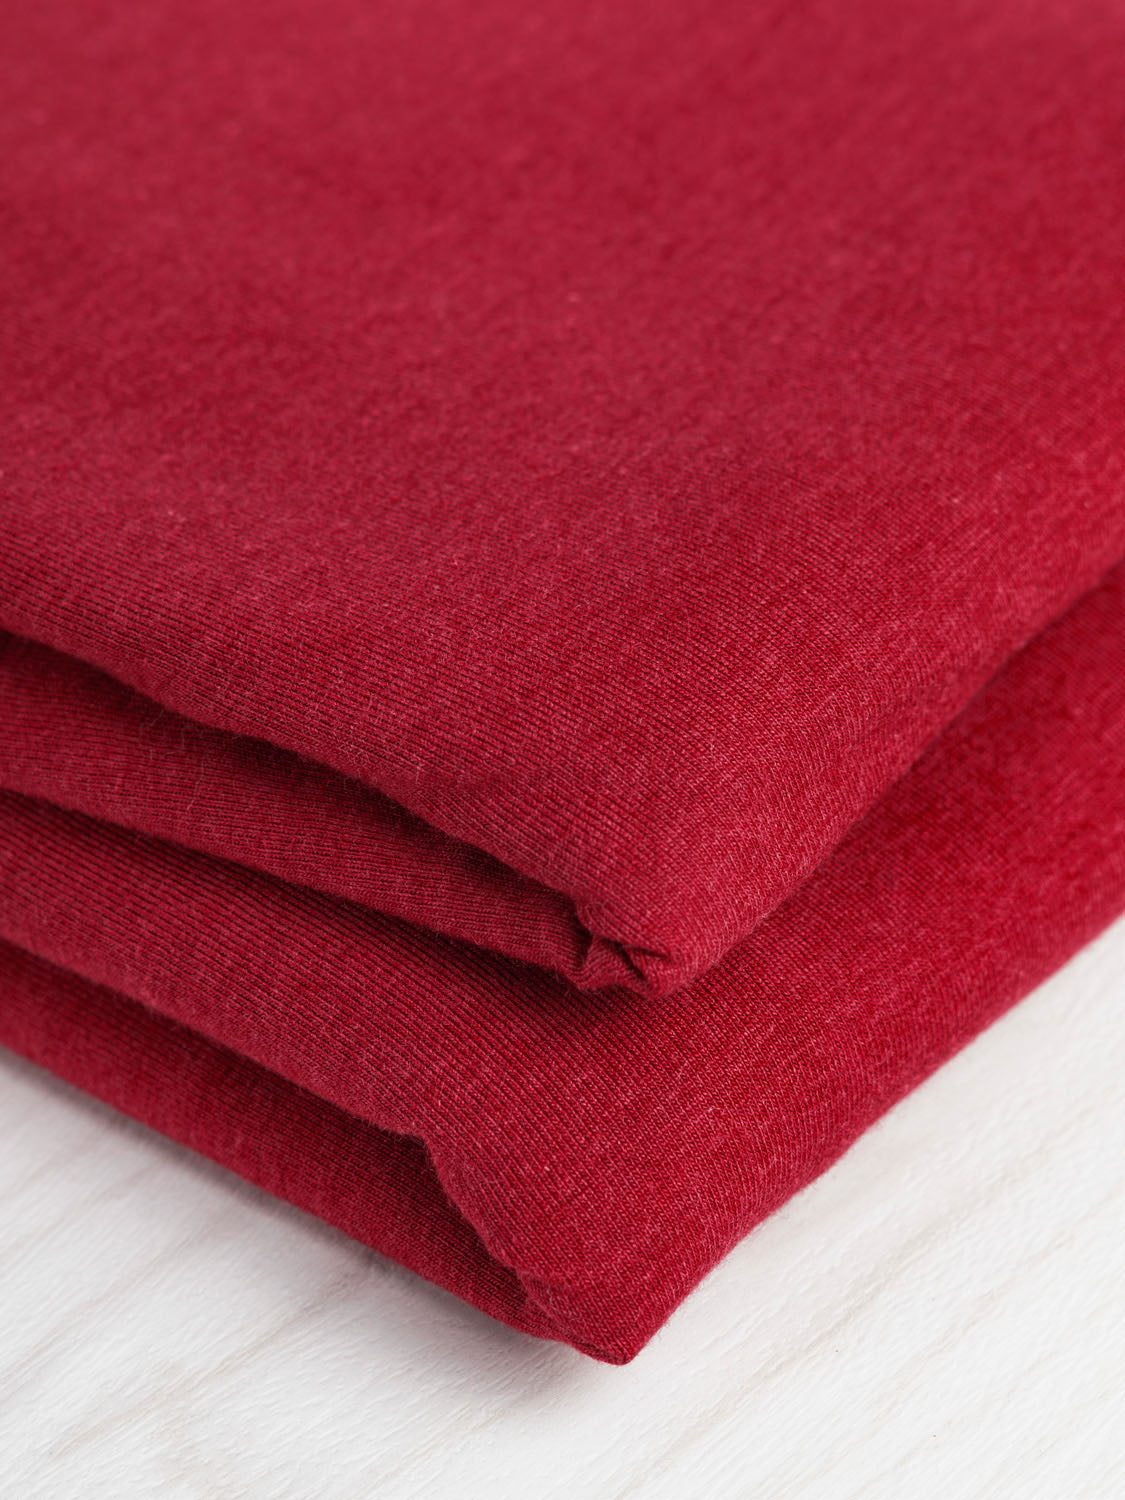 Red Crushed Velvet Velour Stretch Fabric Material Polyester 150cm 59 Wide -   Canada